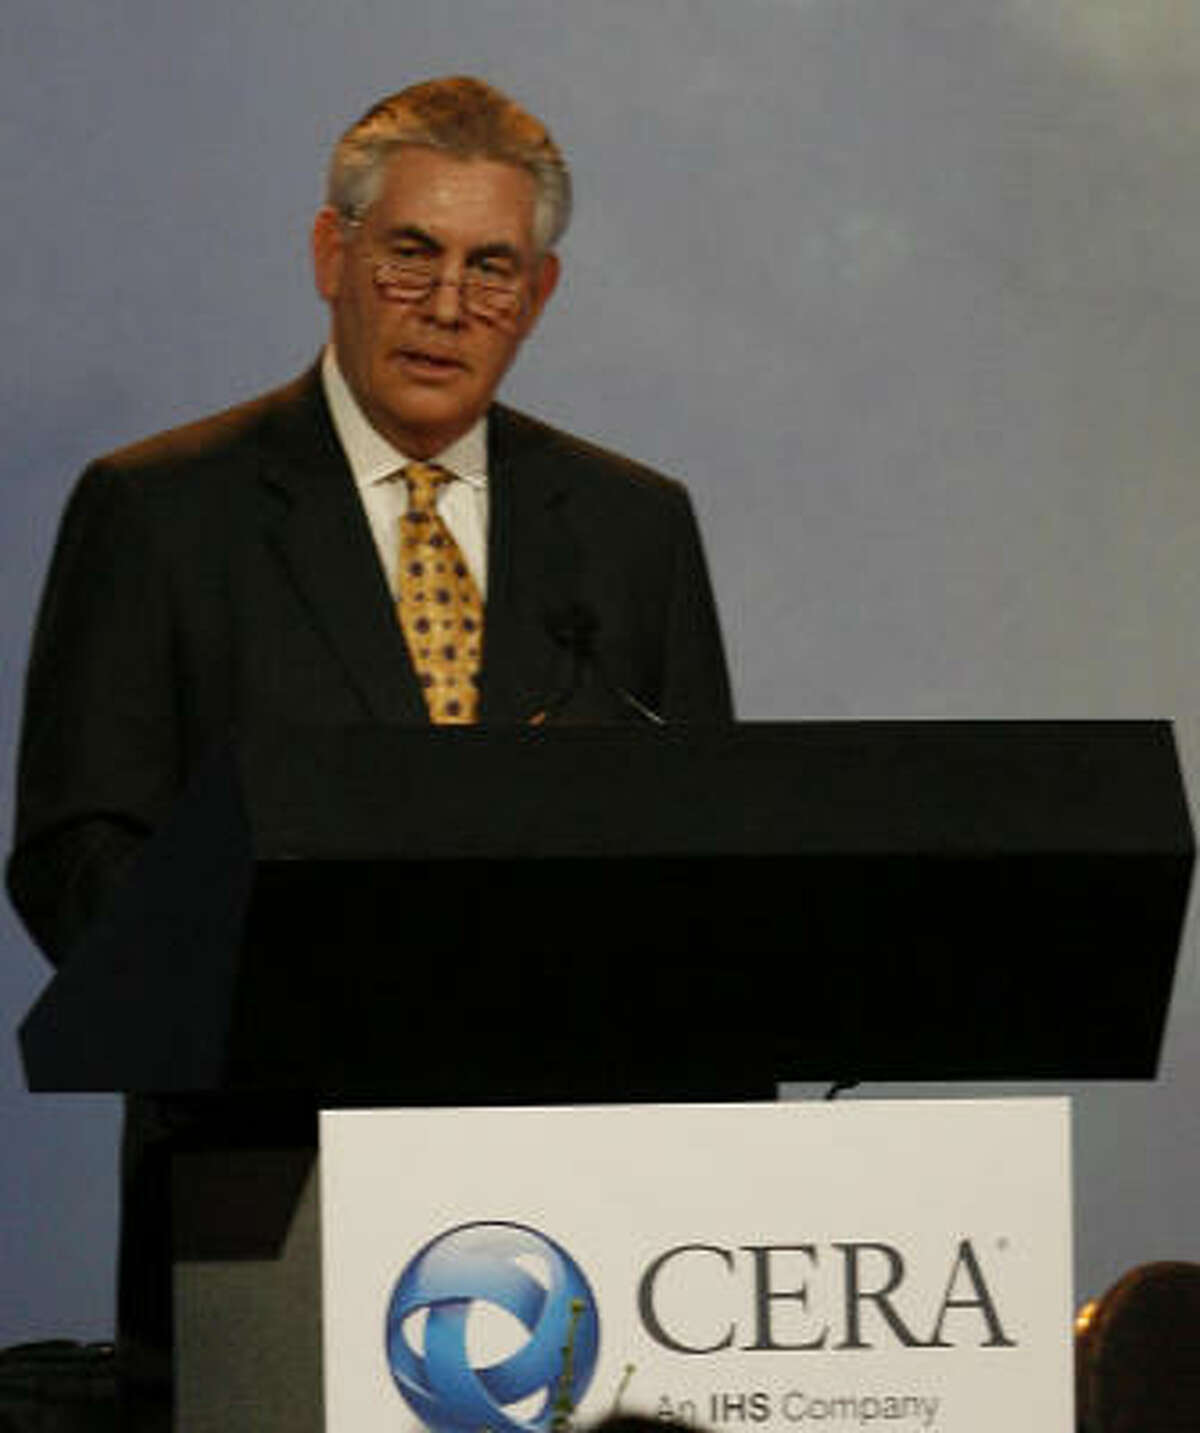 Rex Tillerson, chairman and CEO of Exxon Mobil addresses the Cambridge Energy Research Associates annual conference on its opening day Tuesday at the Westin Galleria.